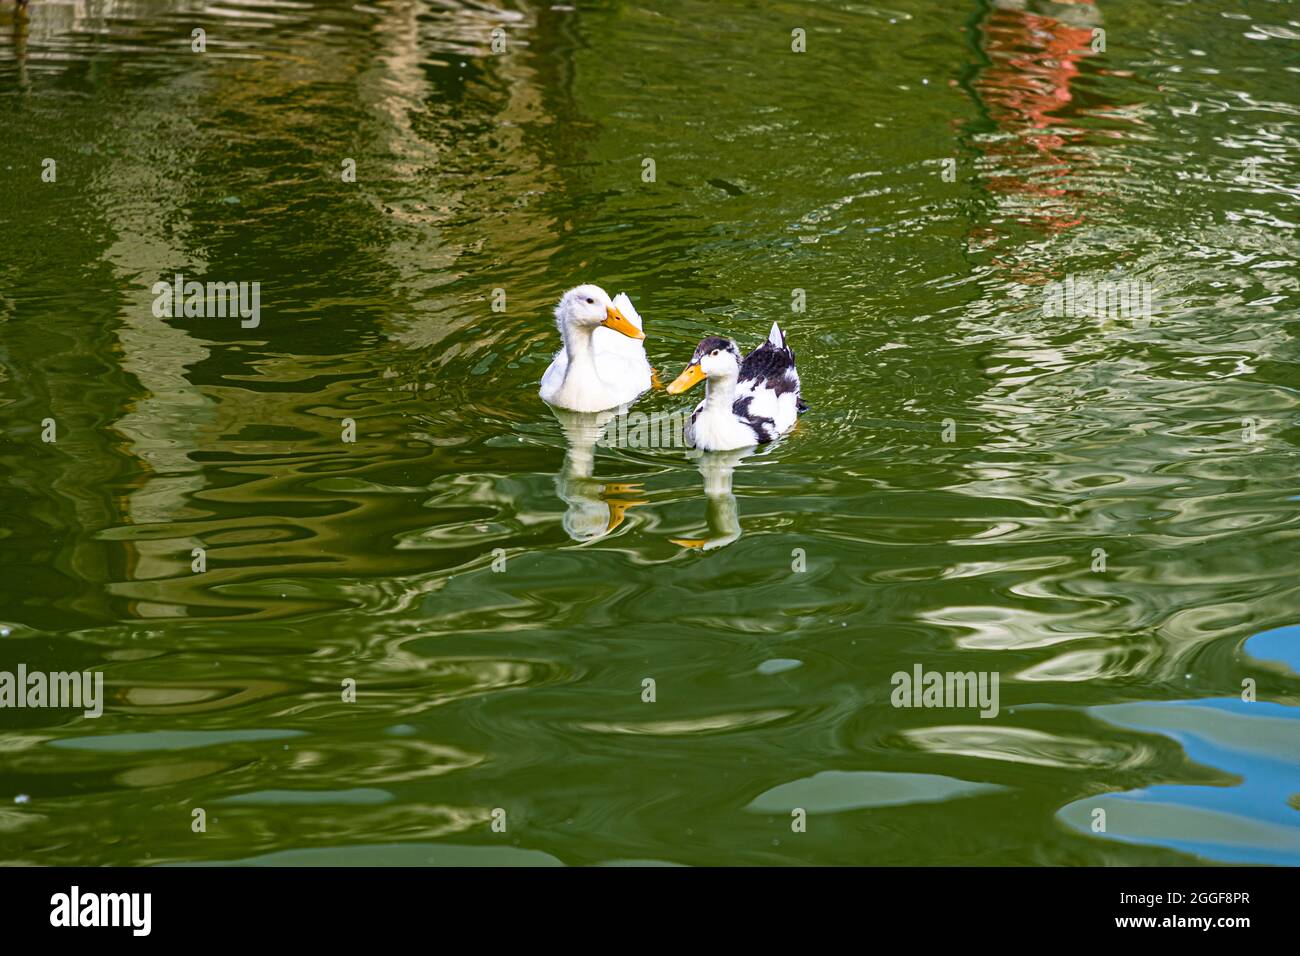 Two ducks swimming in a small pond, Alto Adige, Italy Stock Photo